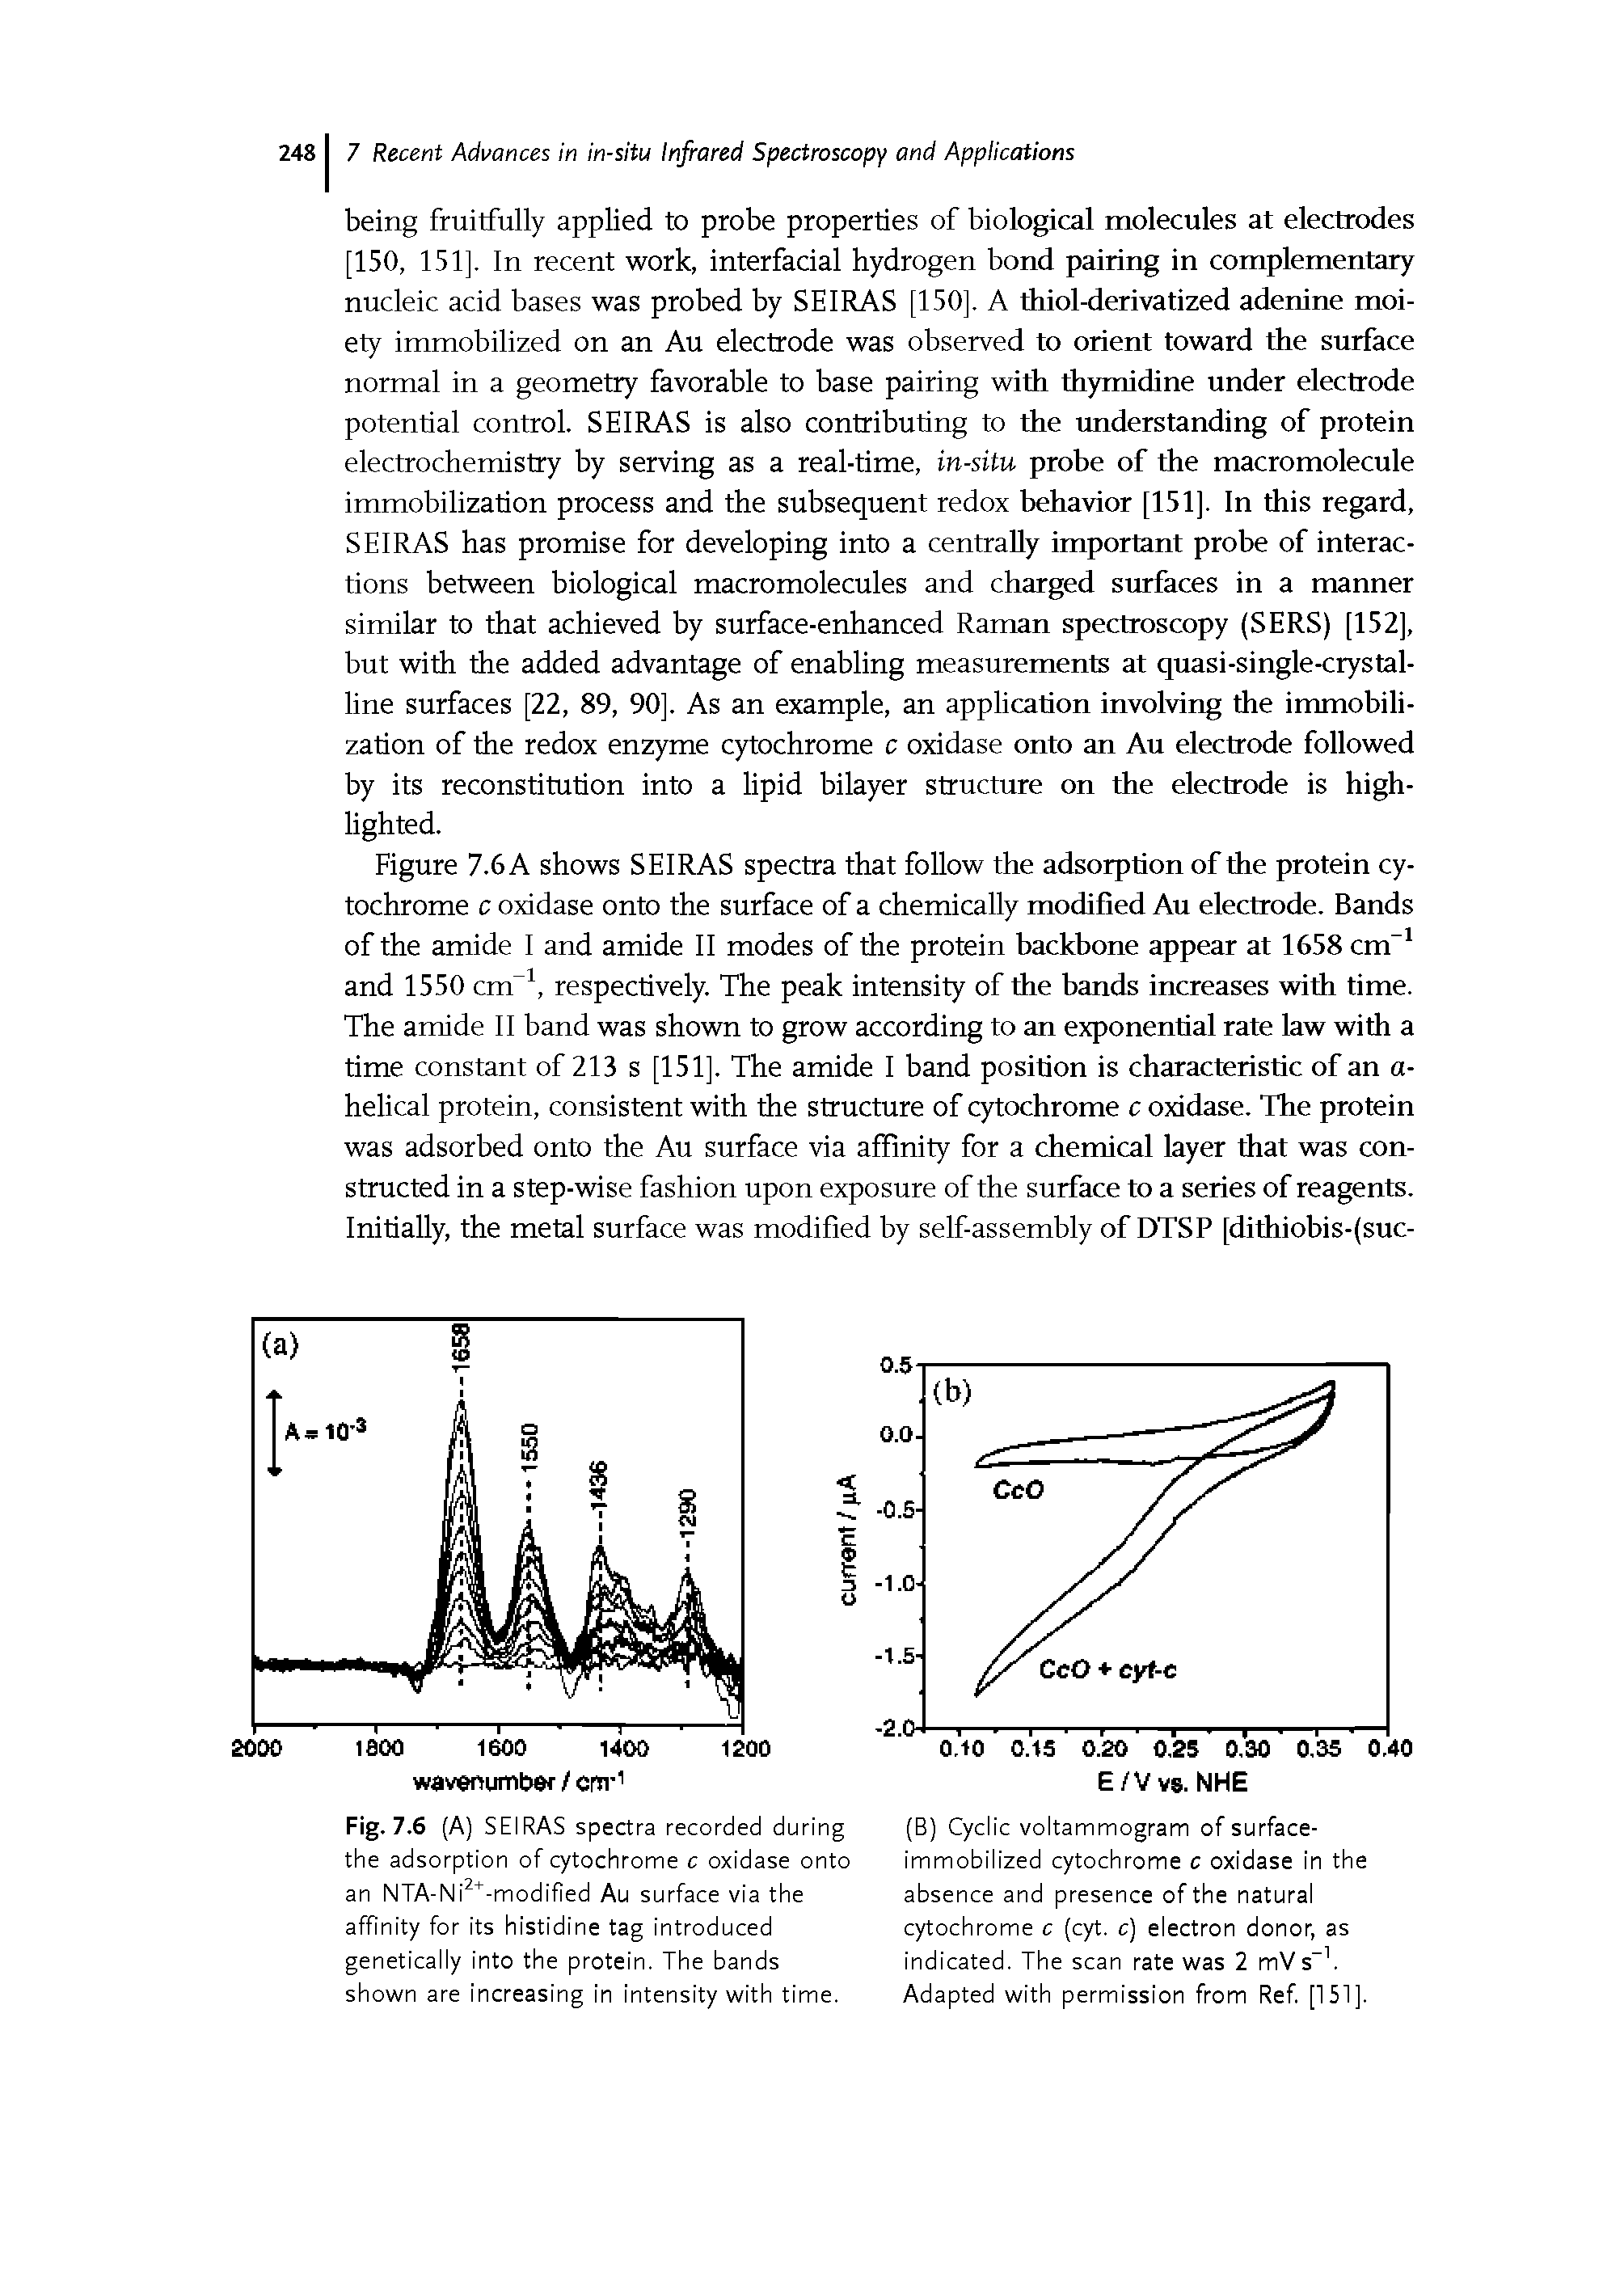 Figure 7.6 A shows SEIRAS spectra that foUow the adsorption of the protein cytochrome c oxidase onto the surface of a chemically modified Au electrode. Bands of the amide I and amide II modes of the protein backbone appear at 1658 cm" and 1550 cm", respectively. The peak intensity of the bands increases with time. The amide II band was shown to grow according to an exponential rate law with a time constant of 213 s [151]. The amide I band position is characteristic of an a-helical protein, consistent with the structure of cytochrome c oxidase. The protein was adsorbed onto the Au surface via affinity for a chemical layer that was constructed in a step-wise fashion upon exposure of the surface to a series of reagents. Initially, the metal surface was modified by self-assembly of DTSP [difhiobis-(suc-...